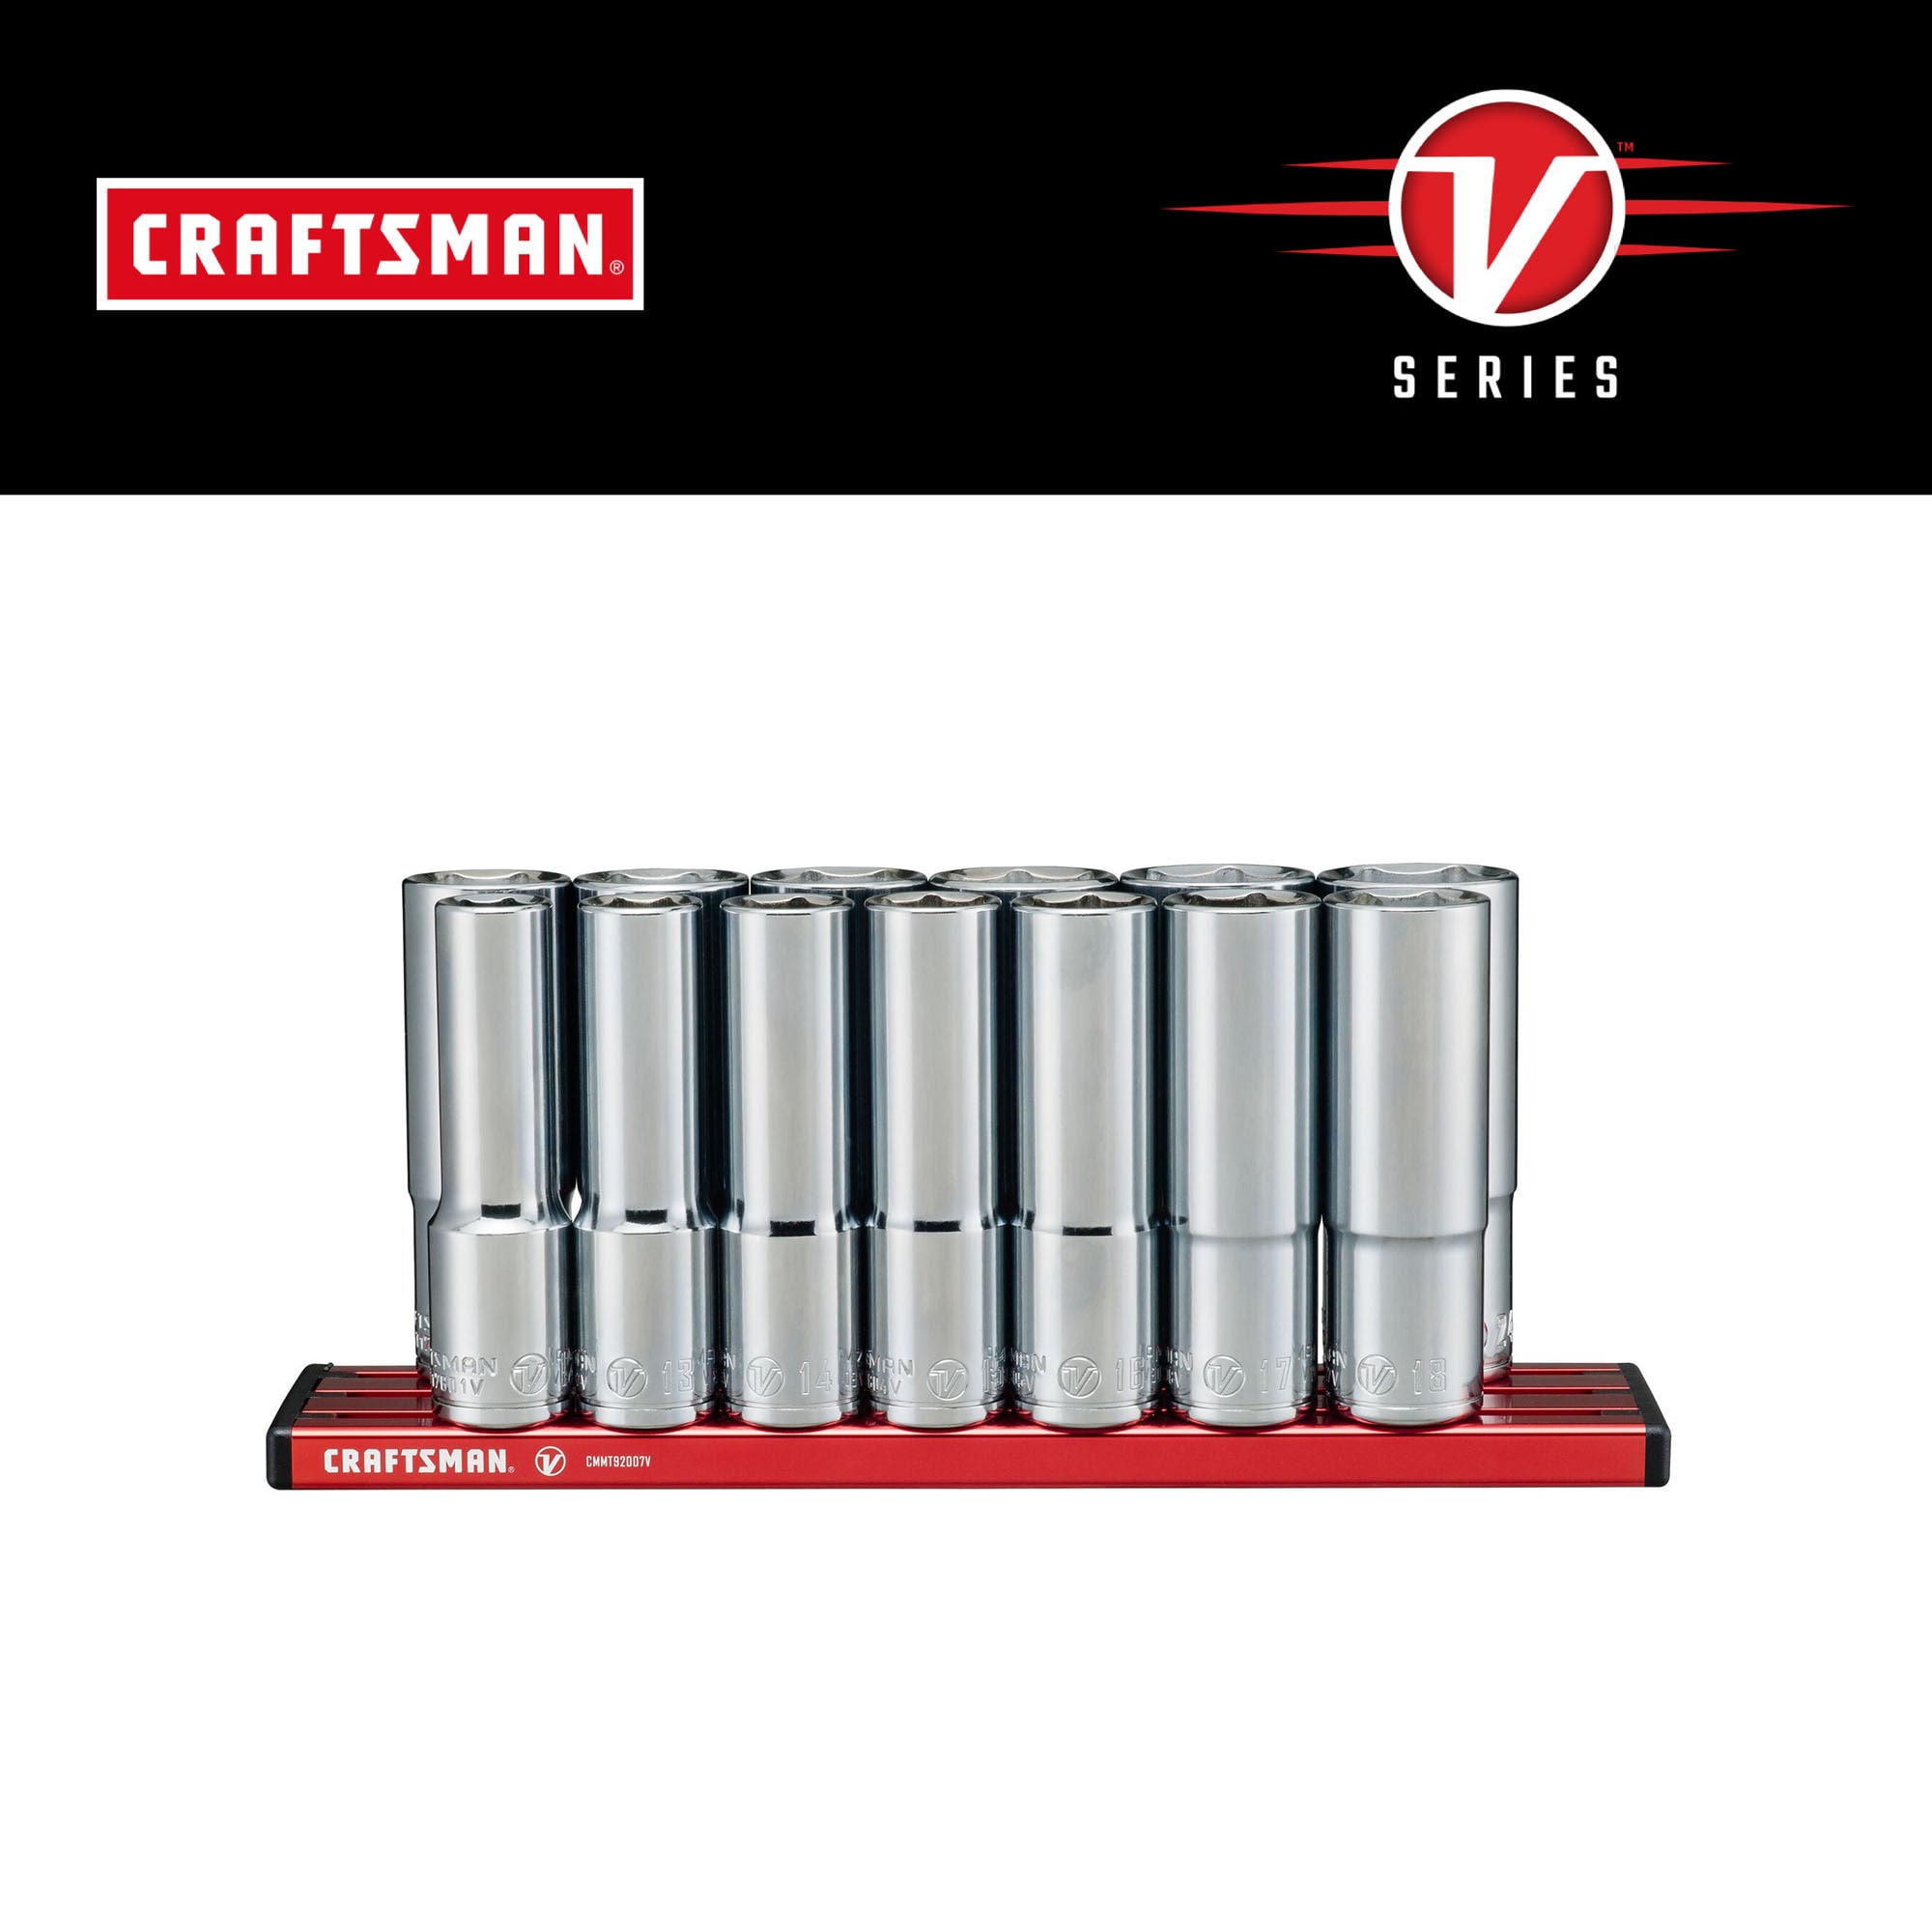 CRAFTSMAN V-Series 13-Piece Metric 1/2-in Drive 6-point Set Deep